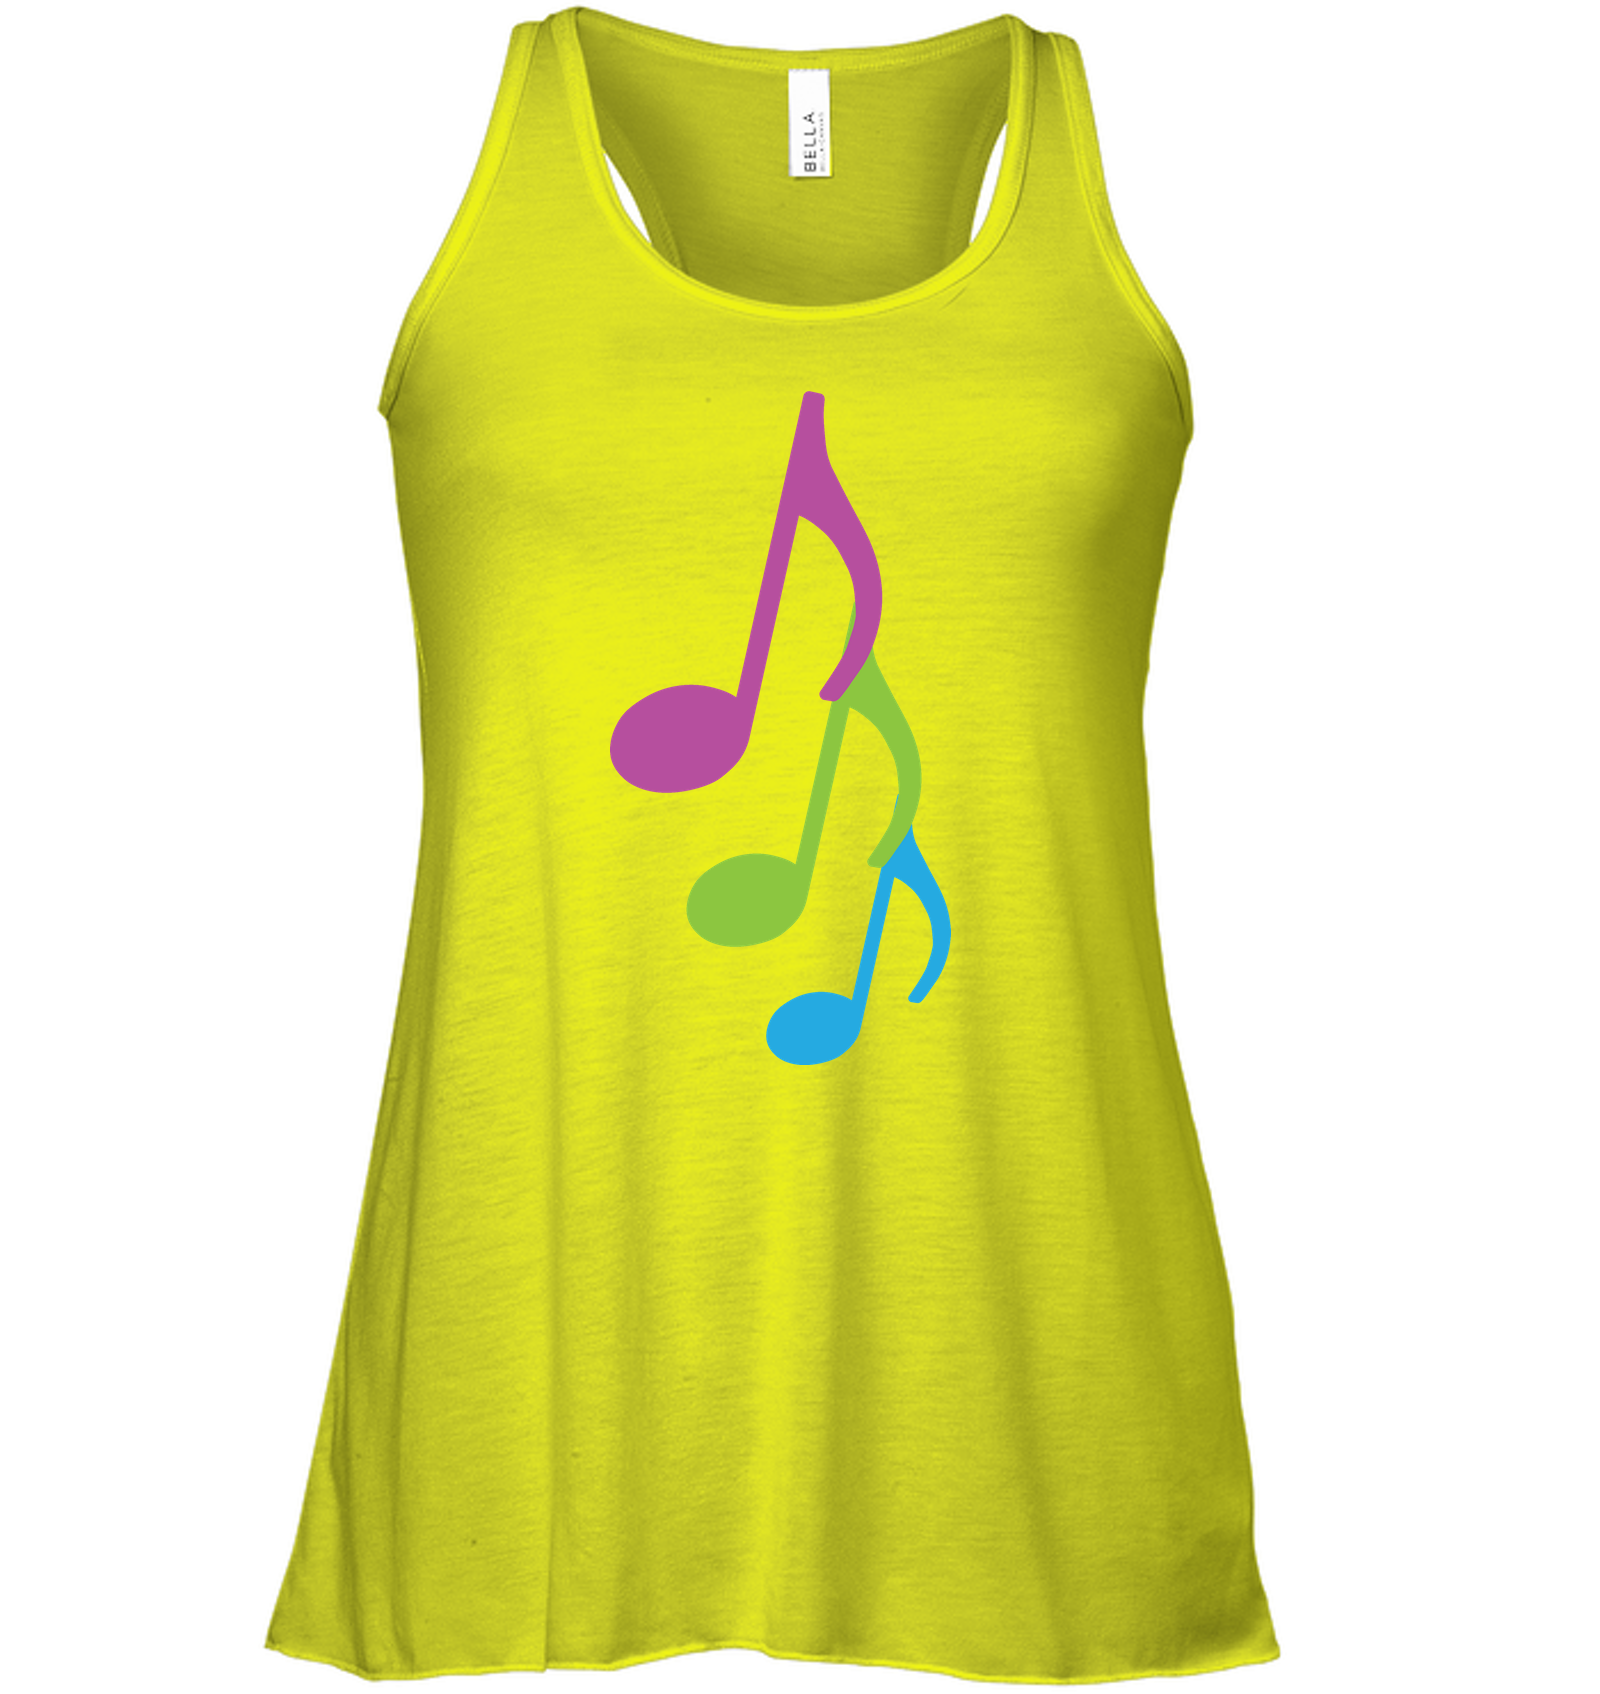 Three colorful musical notes - Bella + Canvas Women's Flowy Racerback Tank